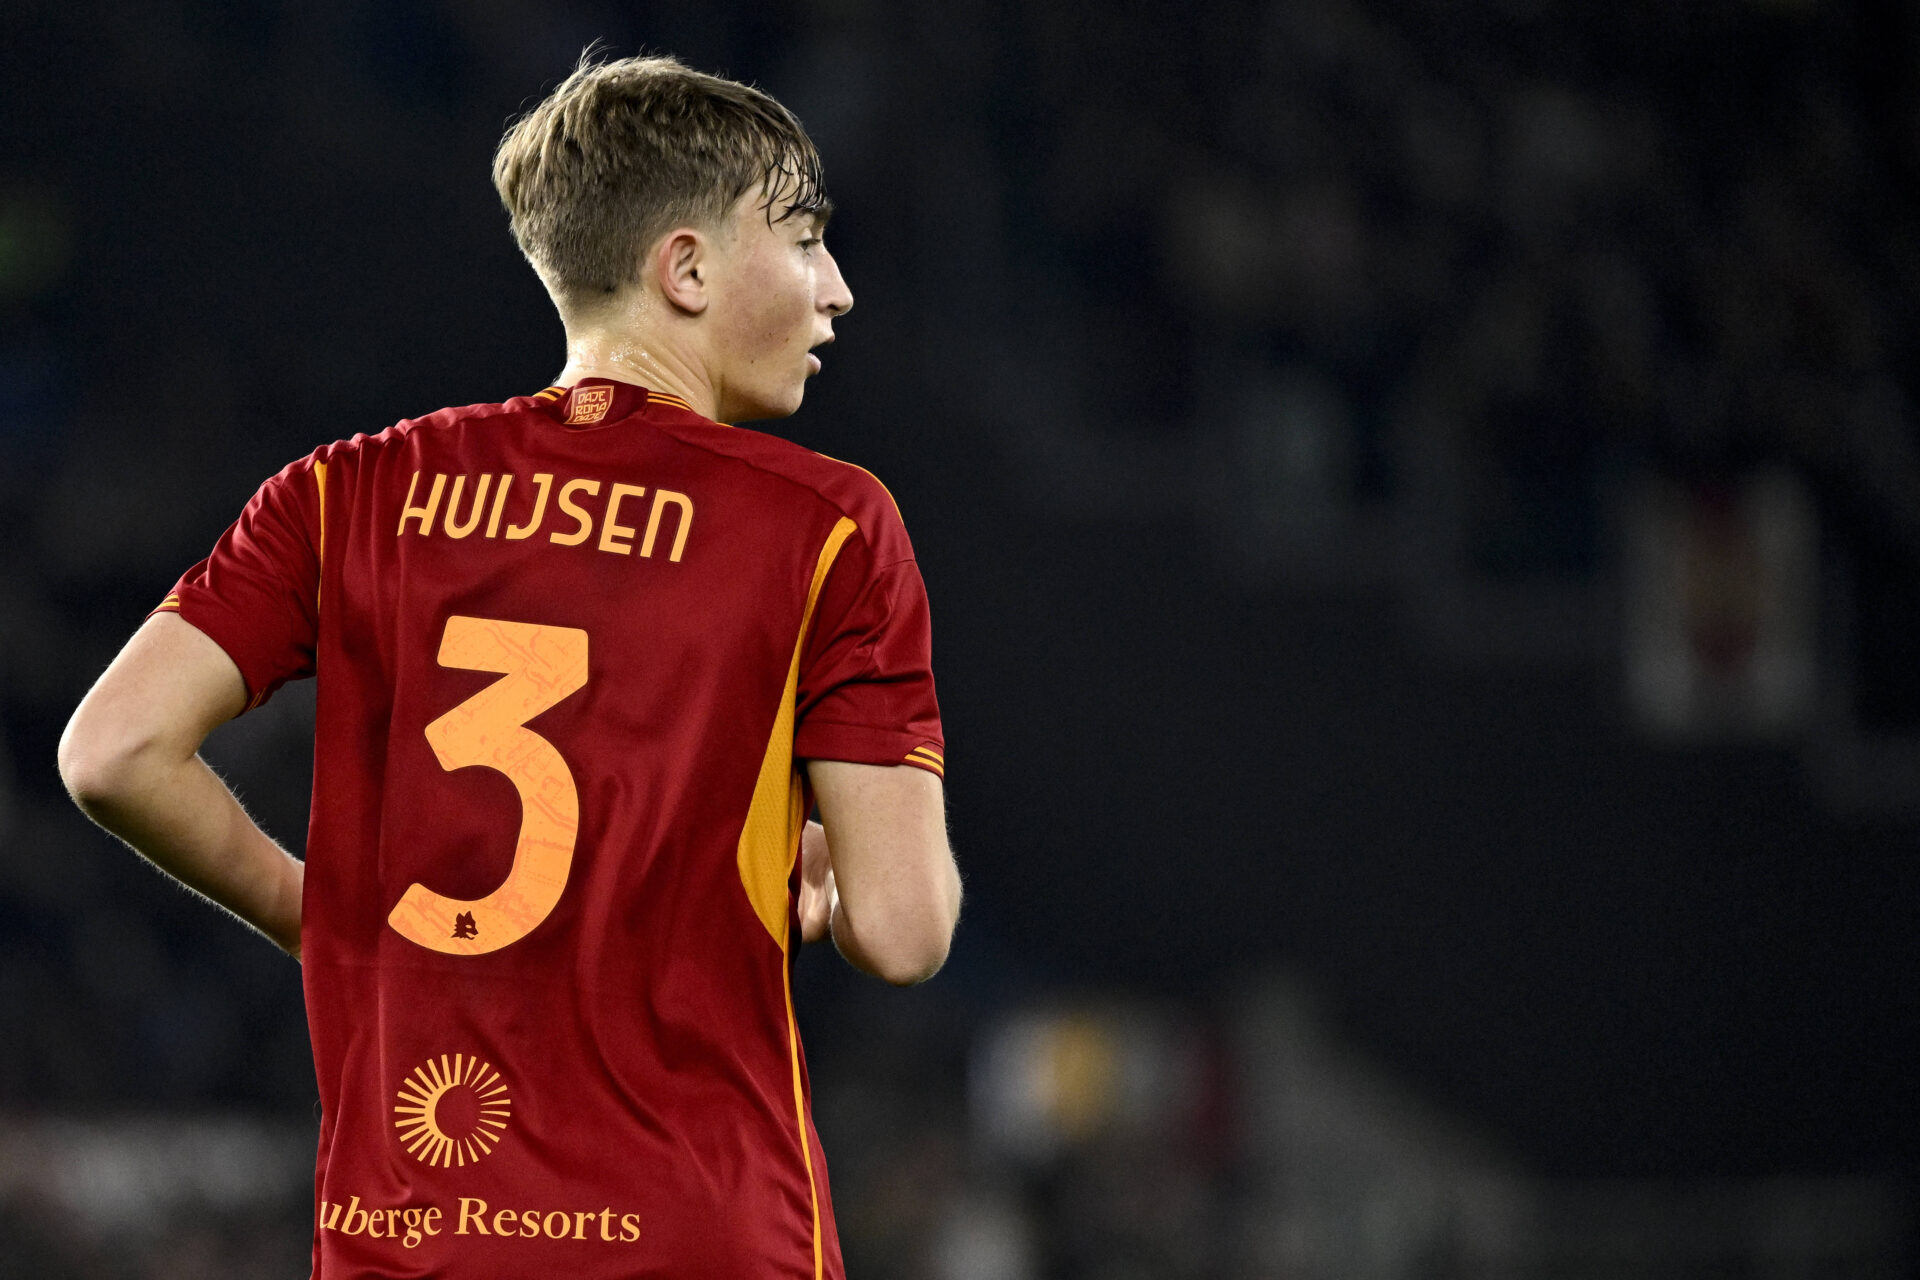 Dean Huijsen is having a solid turn at Roma, but his future will be at Juventus. The Giallorossi would need to arrange a new deal to keep him